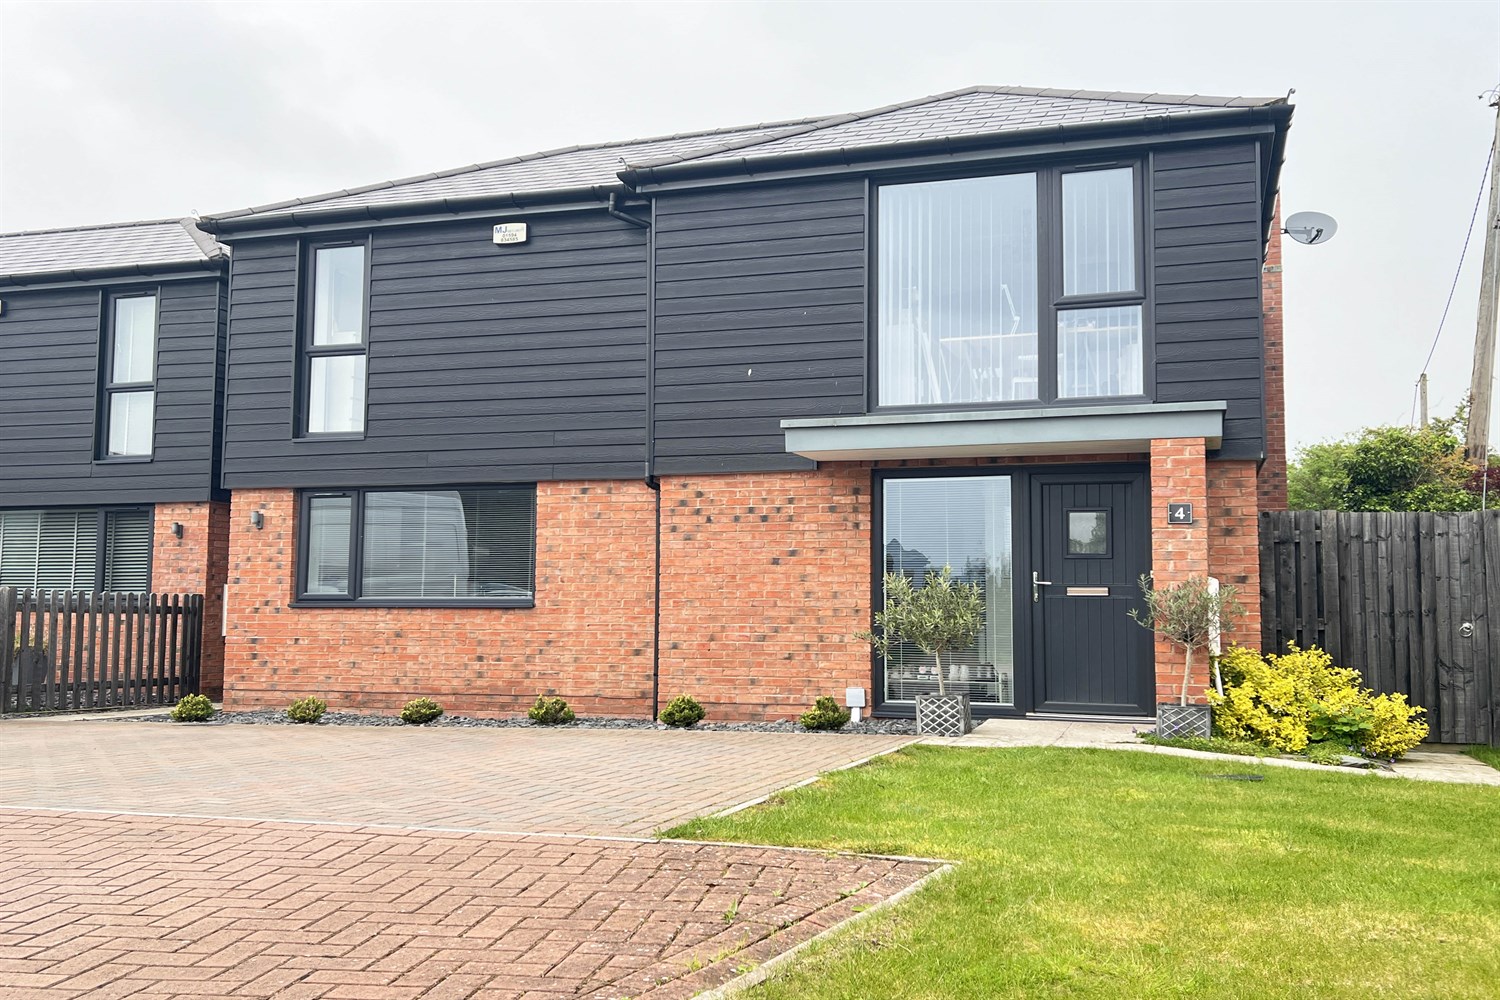 4 The Crossways, Holmer, Hereford